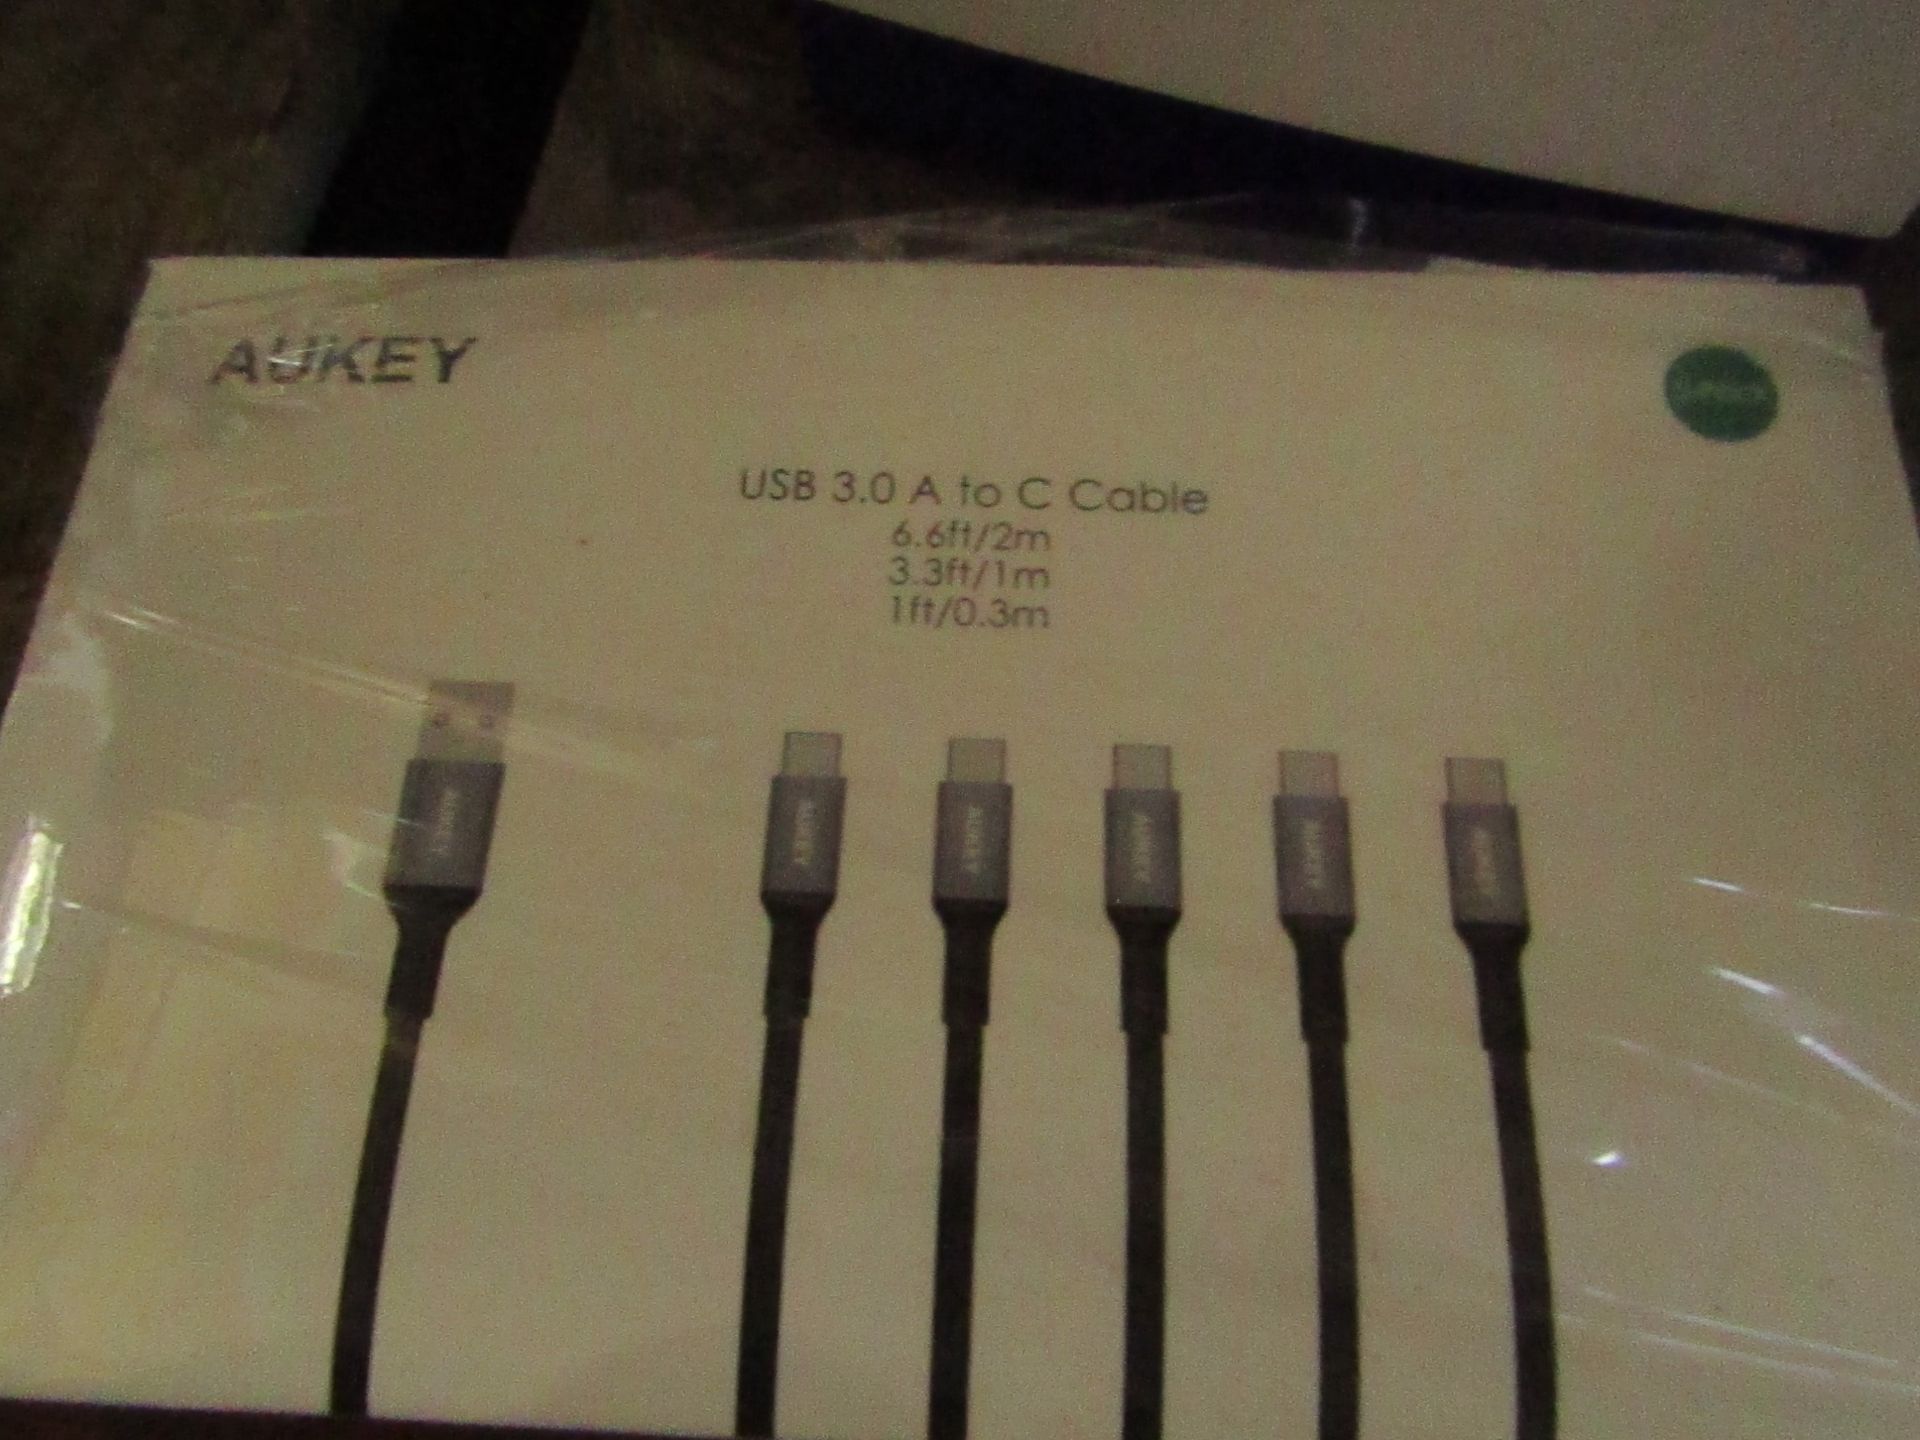 Aukey USB 3.0 A to C cables, 2m / 1m / 0.3m, untested and boxed.